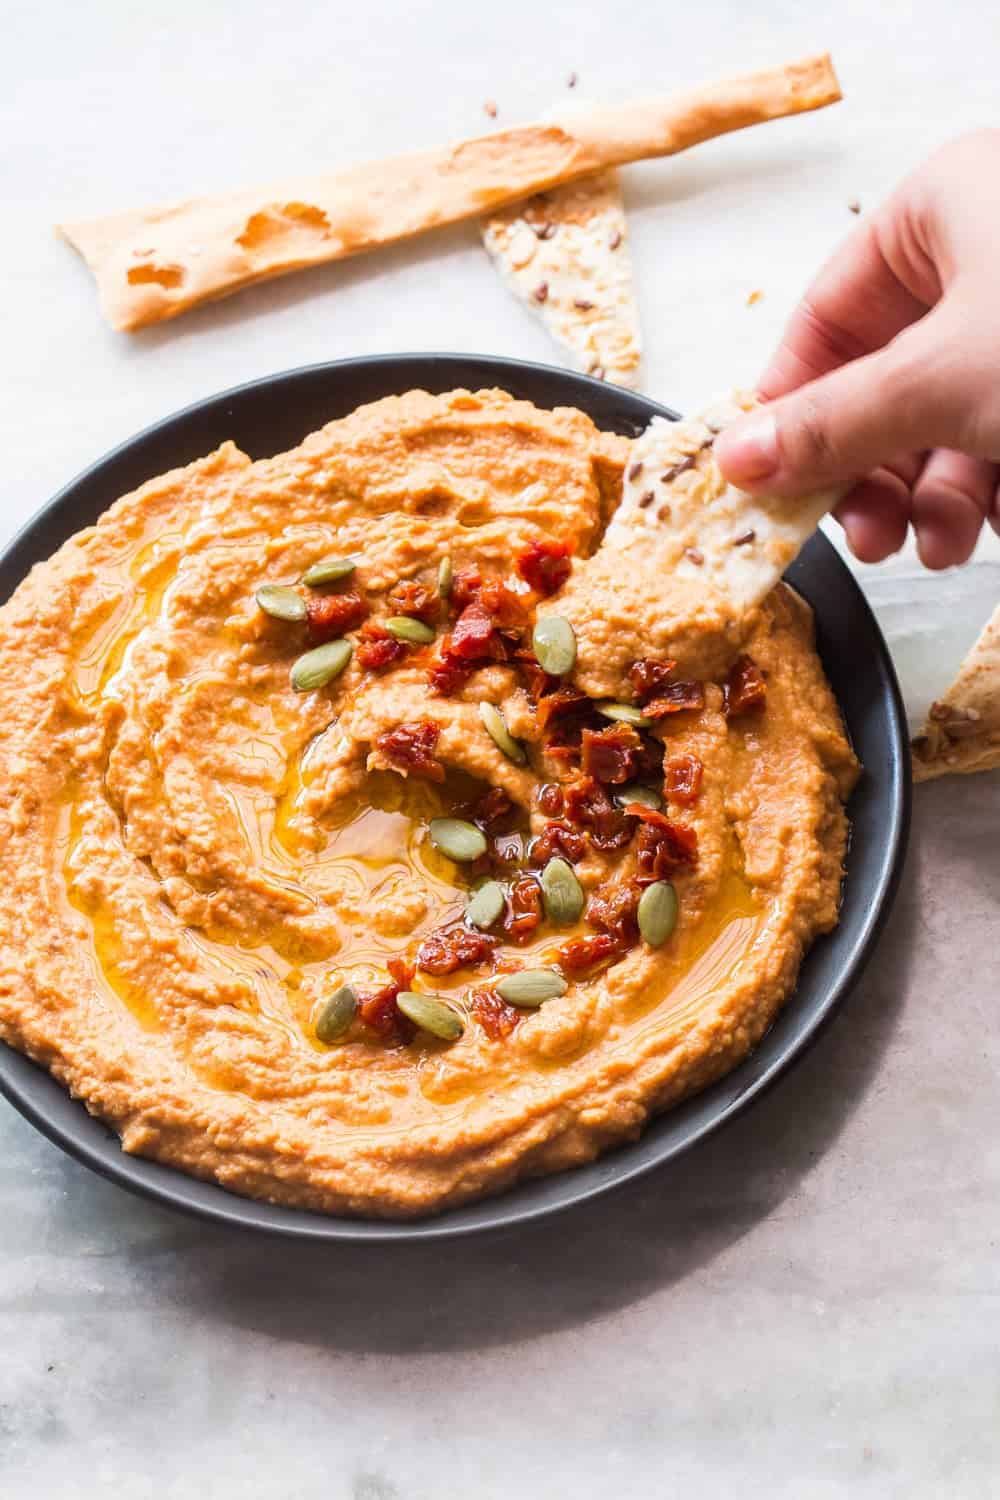 lavash being dipped into the bowl of hummus